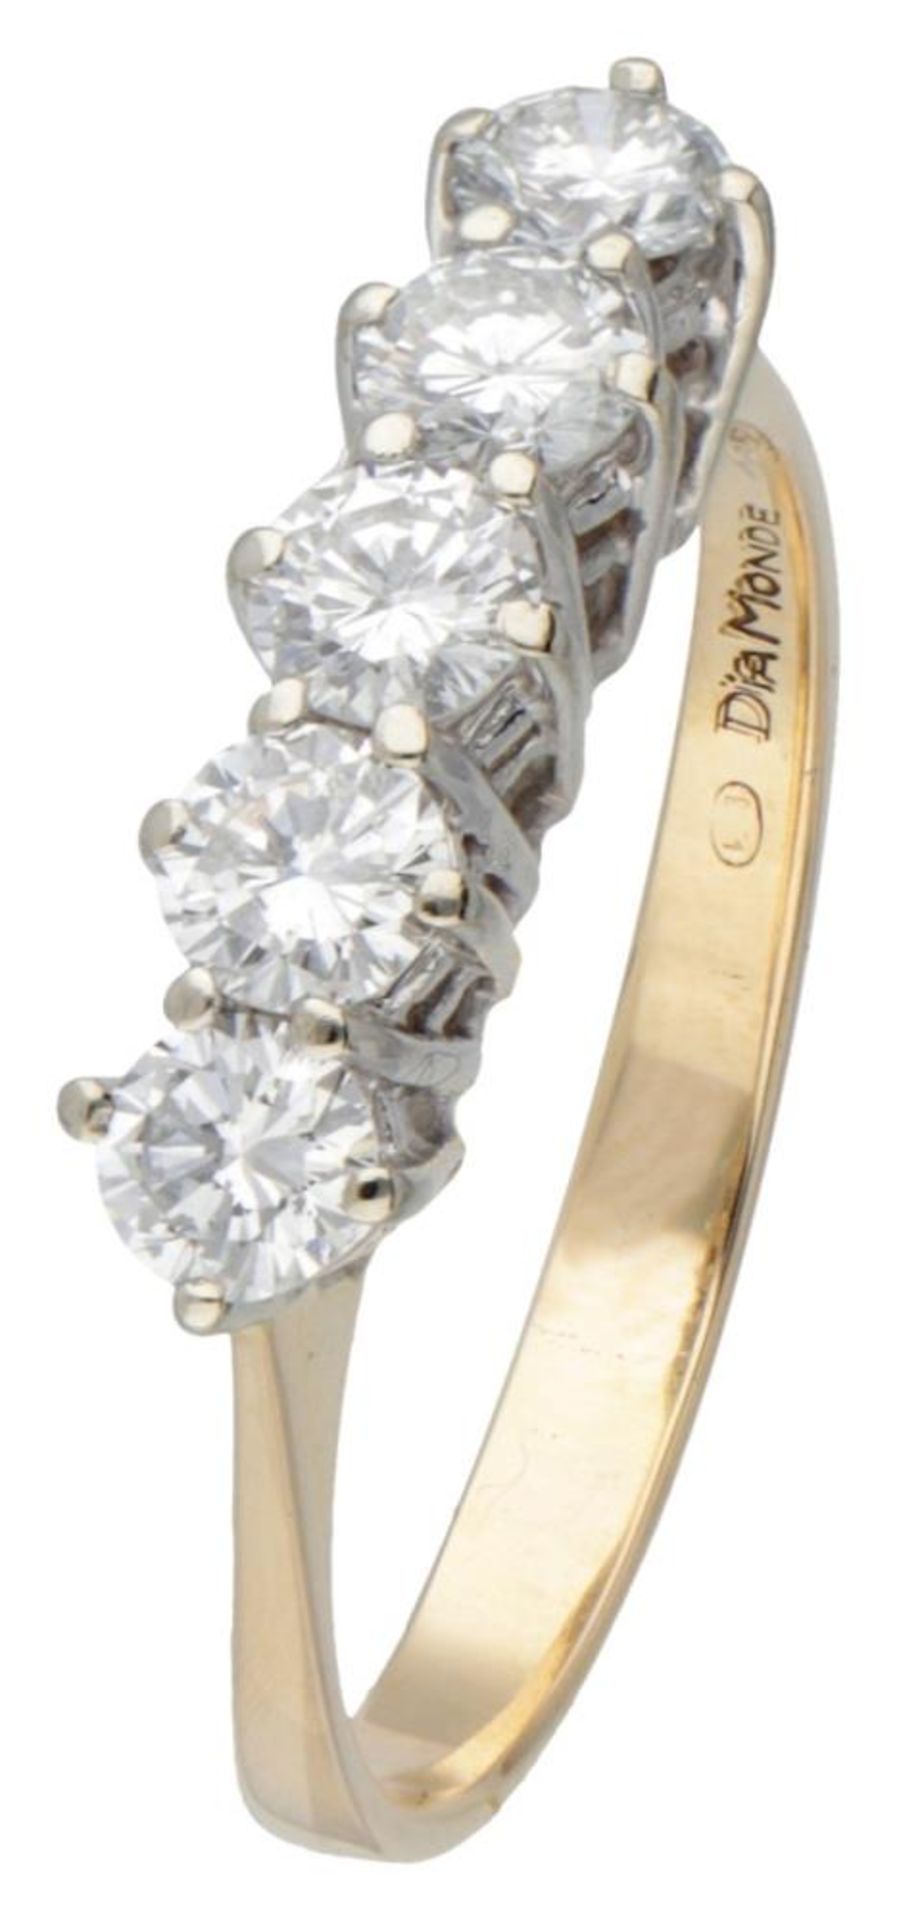 14K. Yellow gold Diamonde alliance ring set with approx. 0.78 ct. diamond. - Image 2 of 6